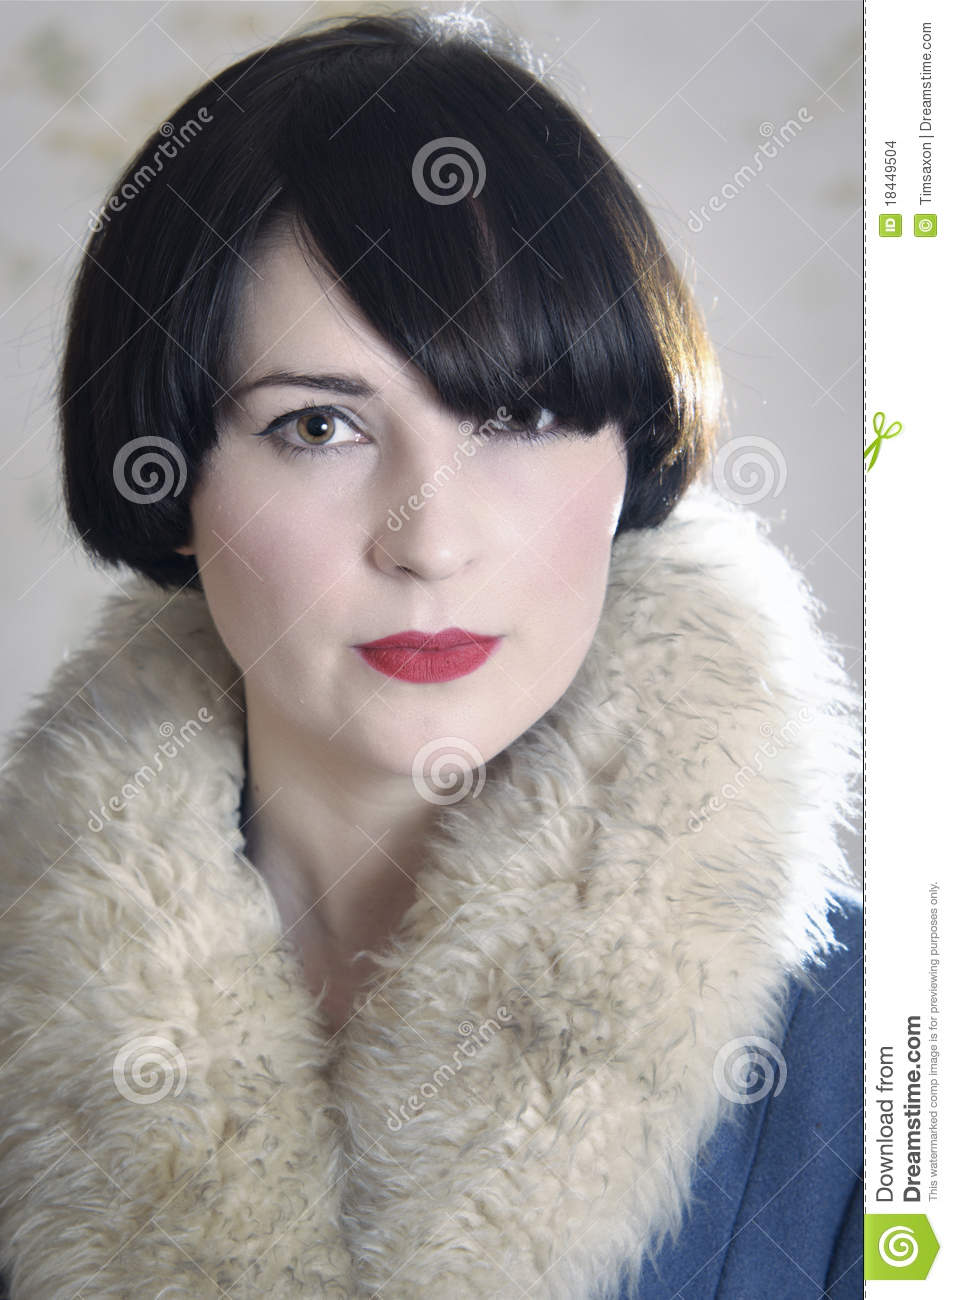 Dark Haired Young Woman Wearing A Coat With A Fake Fur Collar